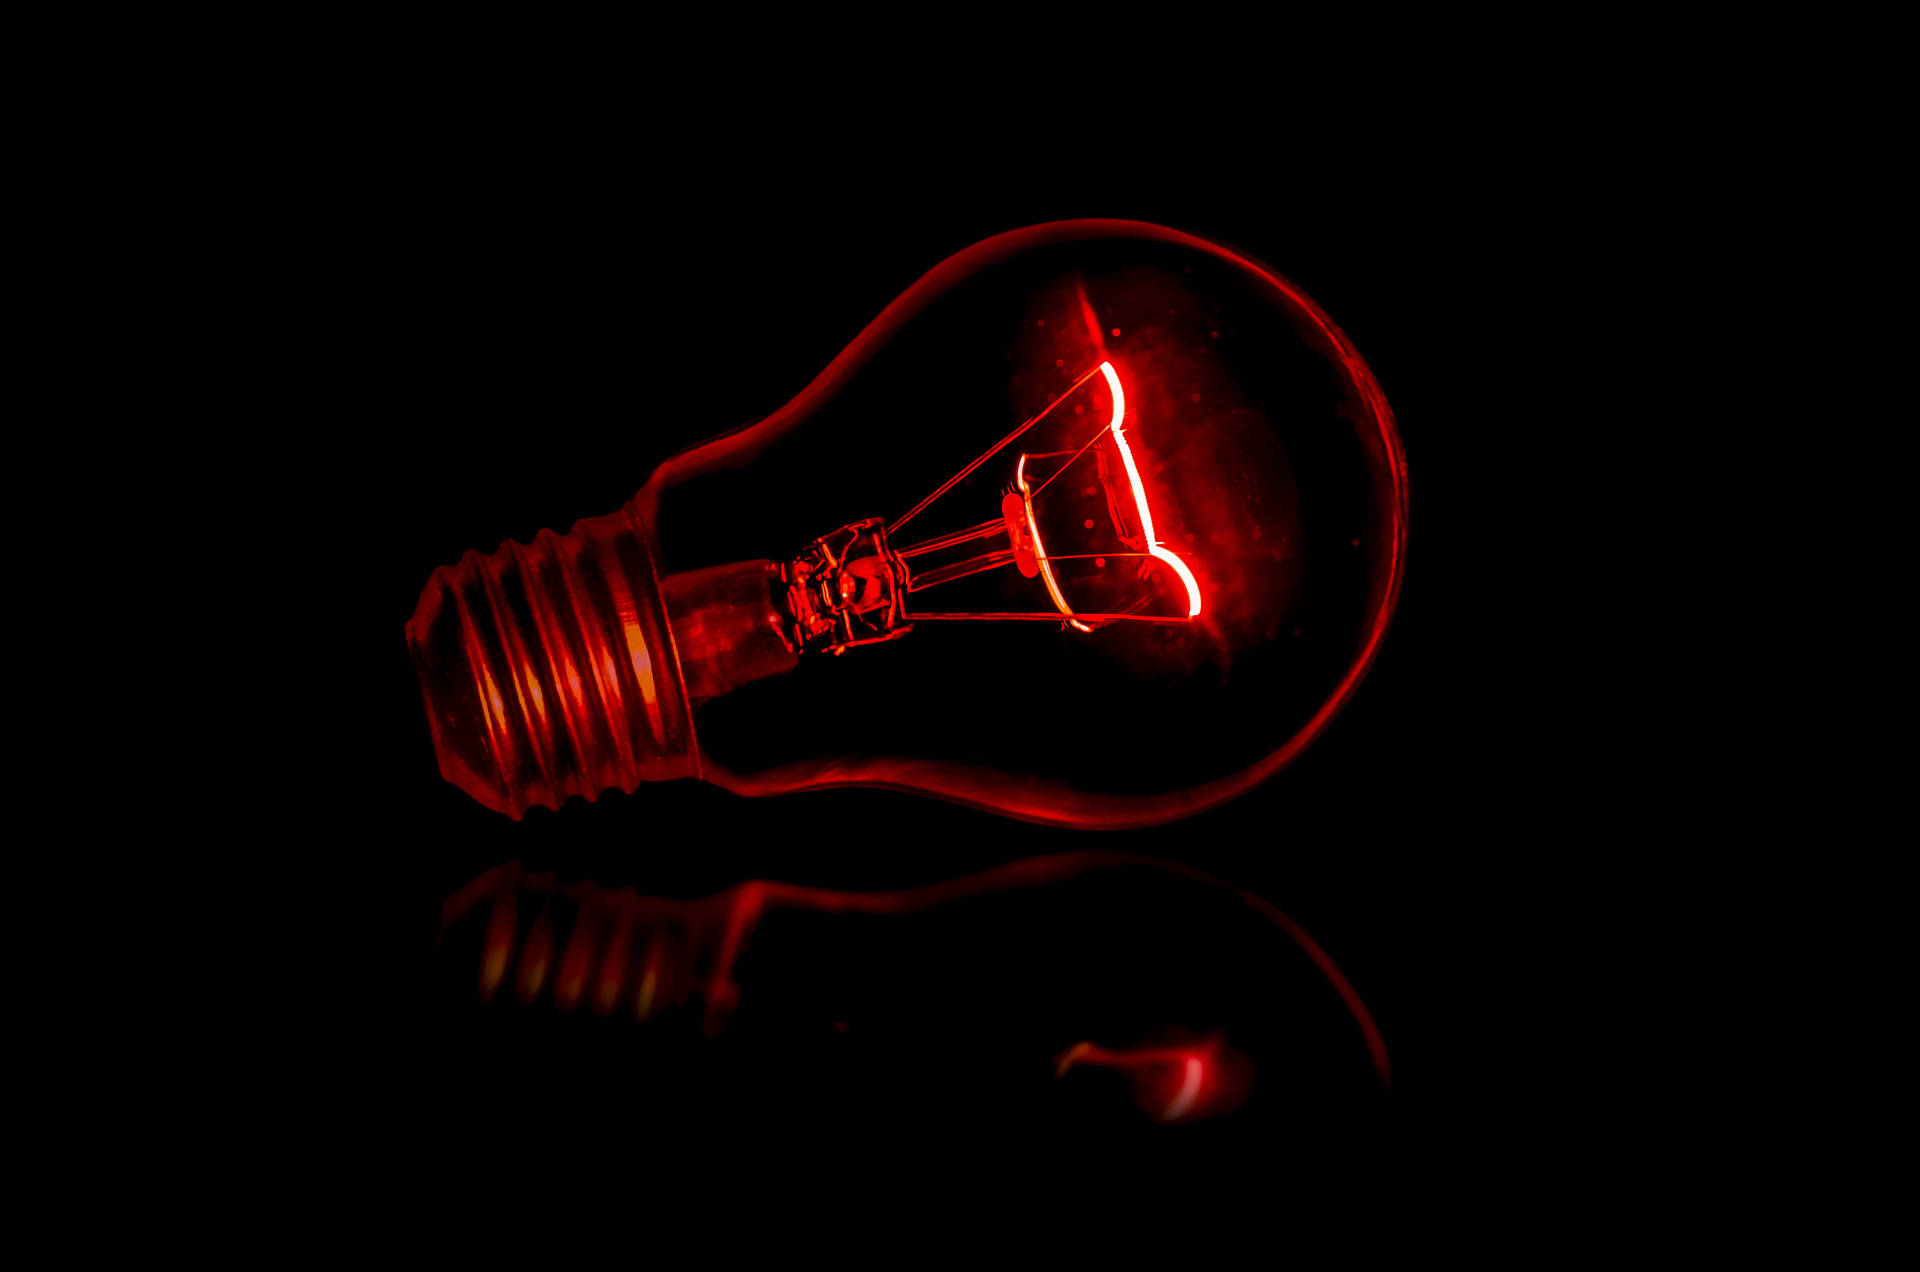 Turn on the red light - explore the possibilities! Wallpaper